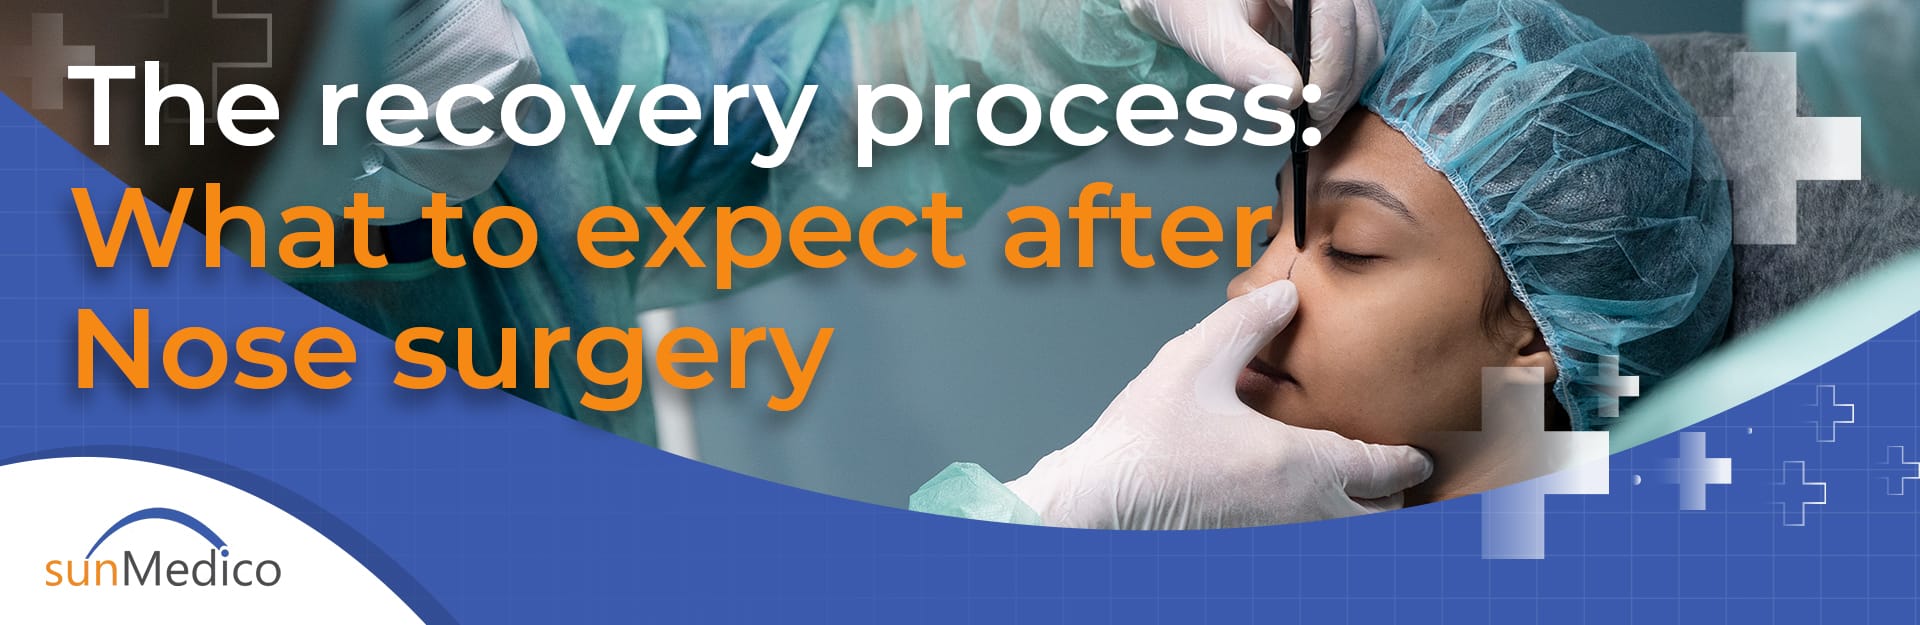 The recovery process: what to expect after nose surgery